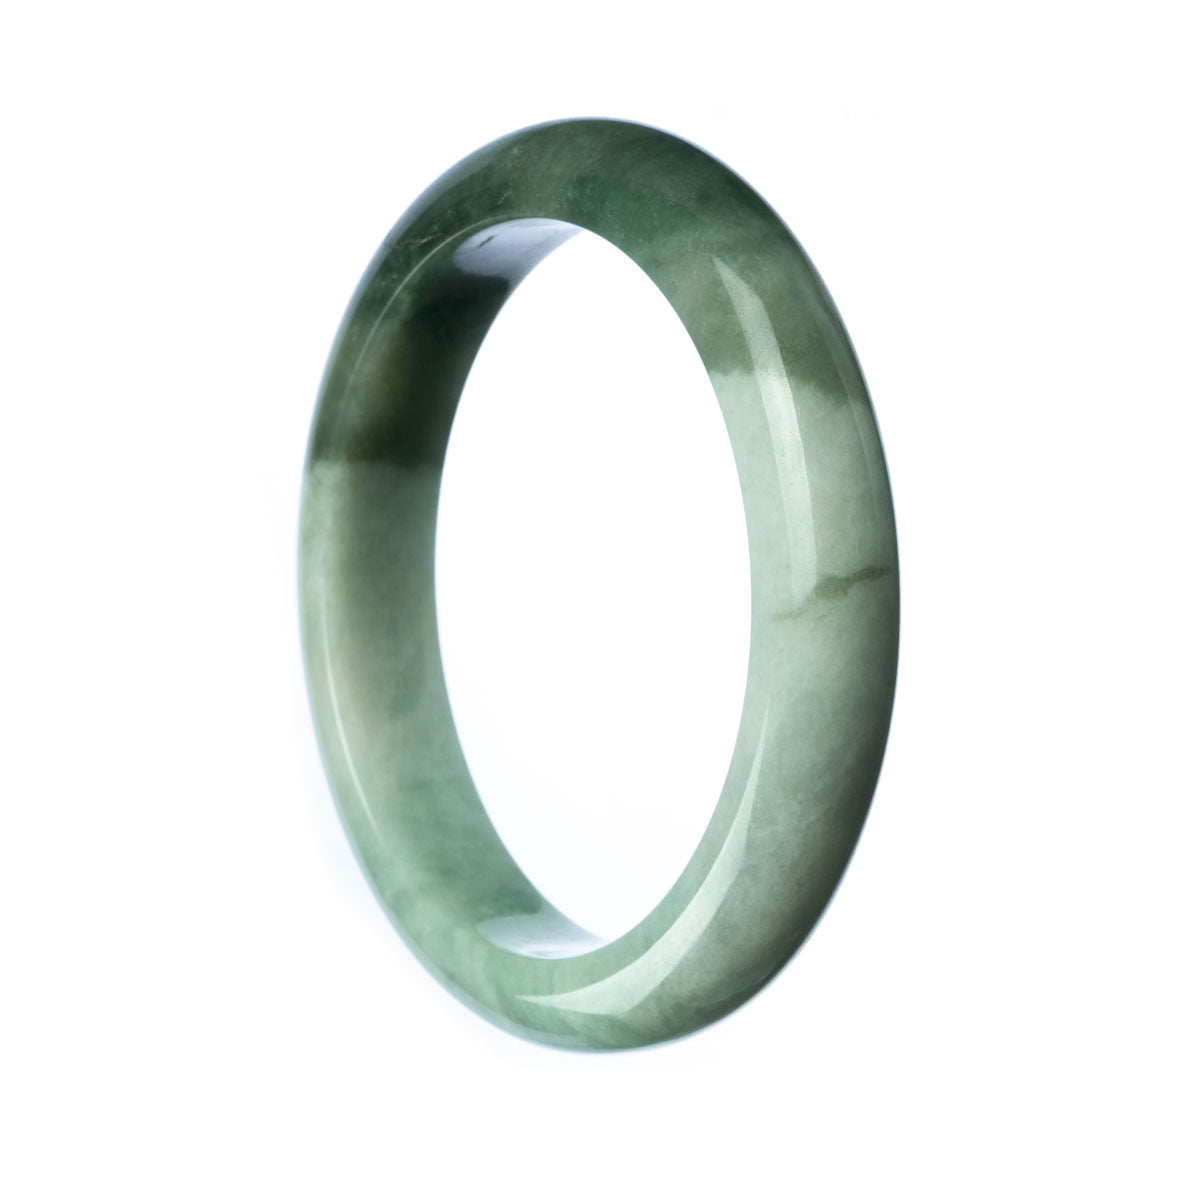 A beautiful green jadeite bangle bracelet with a semi-round shape measuring 77mm in diameter, exuding an authentic and natural charm.